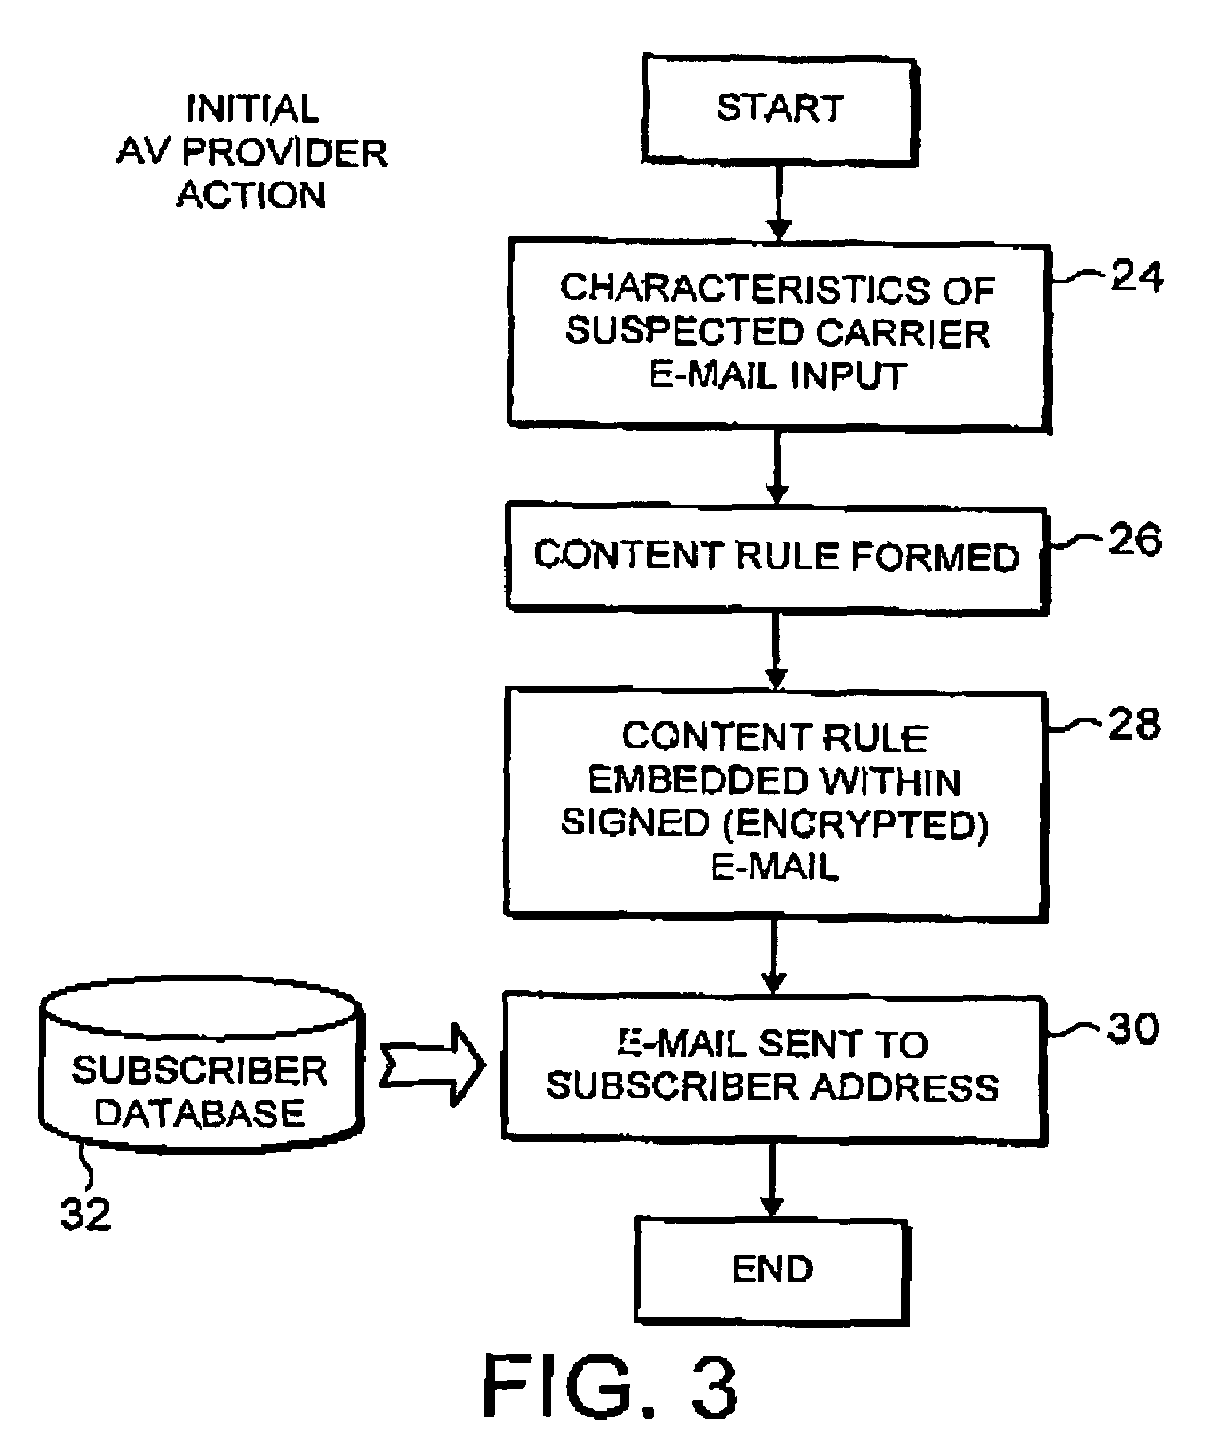 Detecting malware carried by an e-mail message